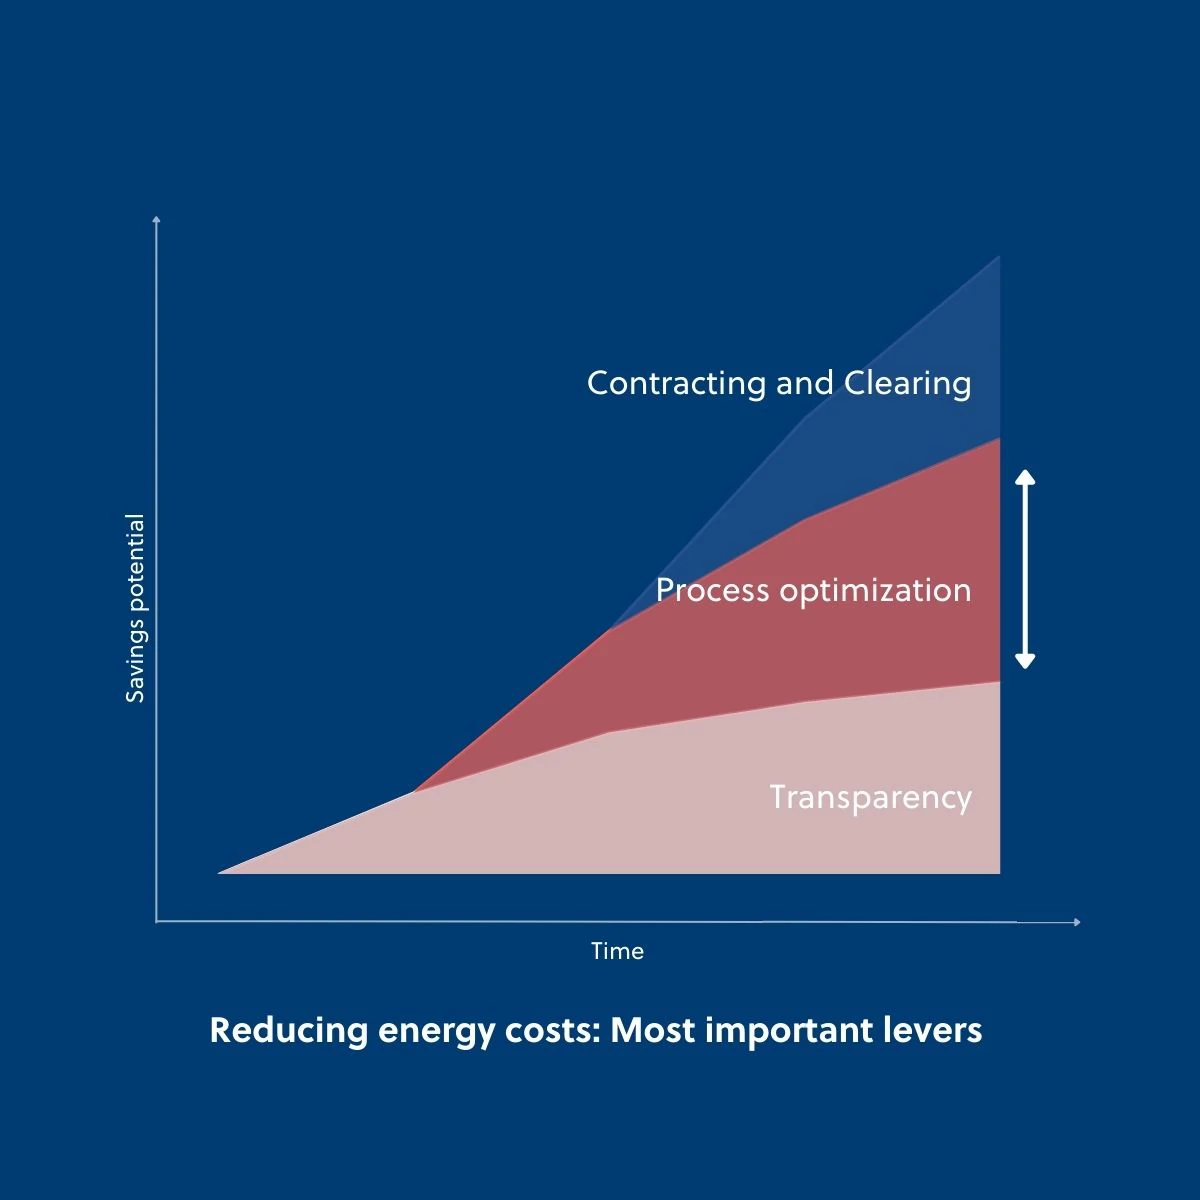 Transparency alone is not enough to achieve sustainable improvements in energy efficiency. Instead, companies must optimize their processes. Further savings potential can be achieved through contracting & clearing.